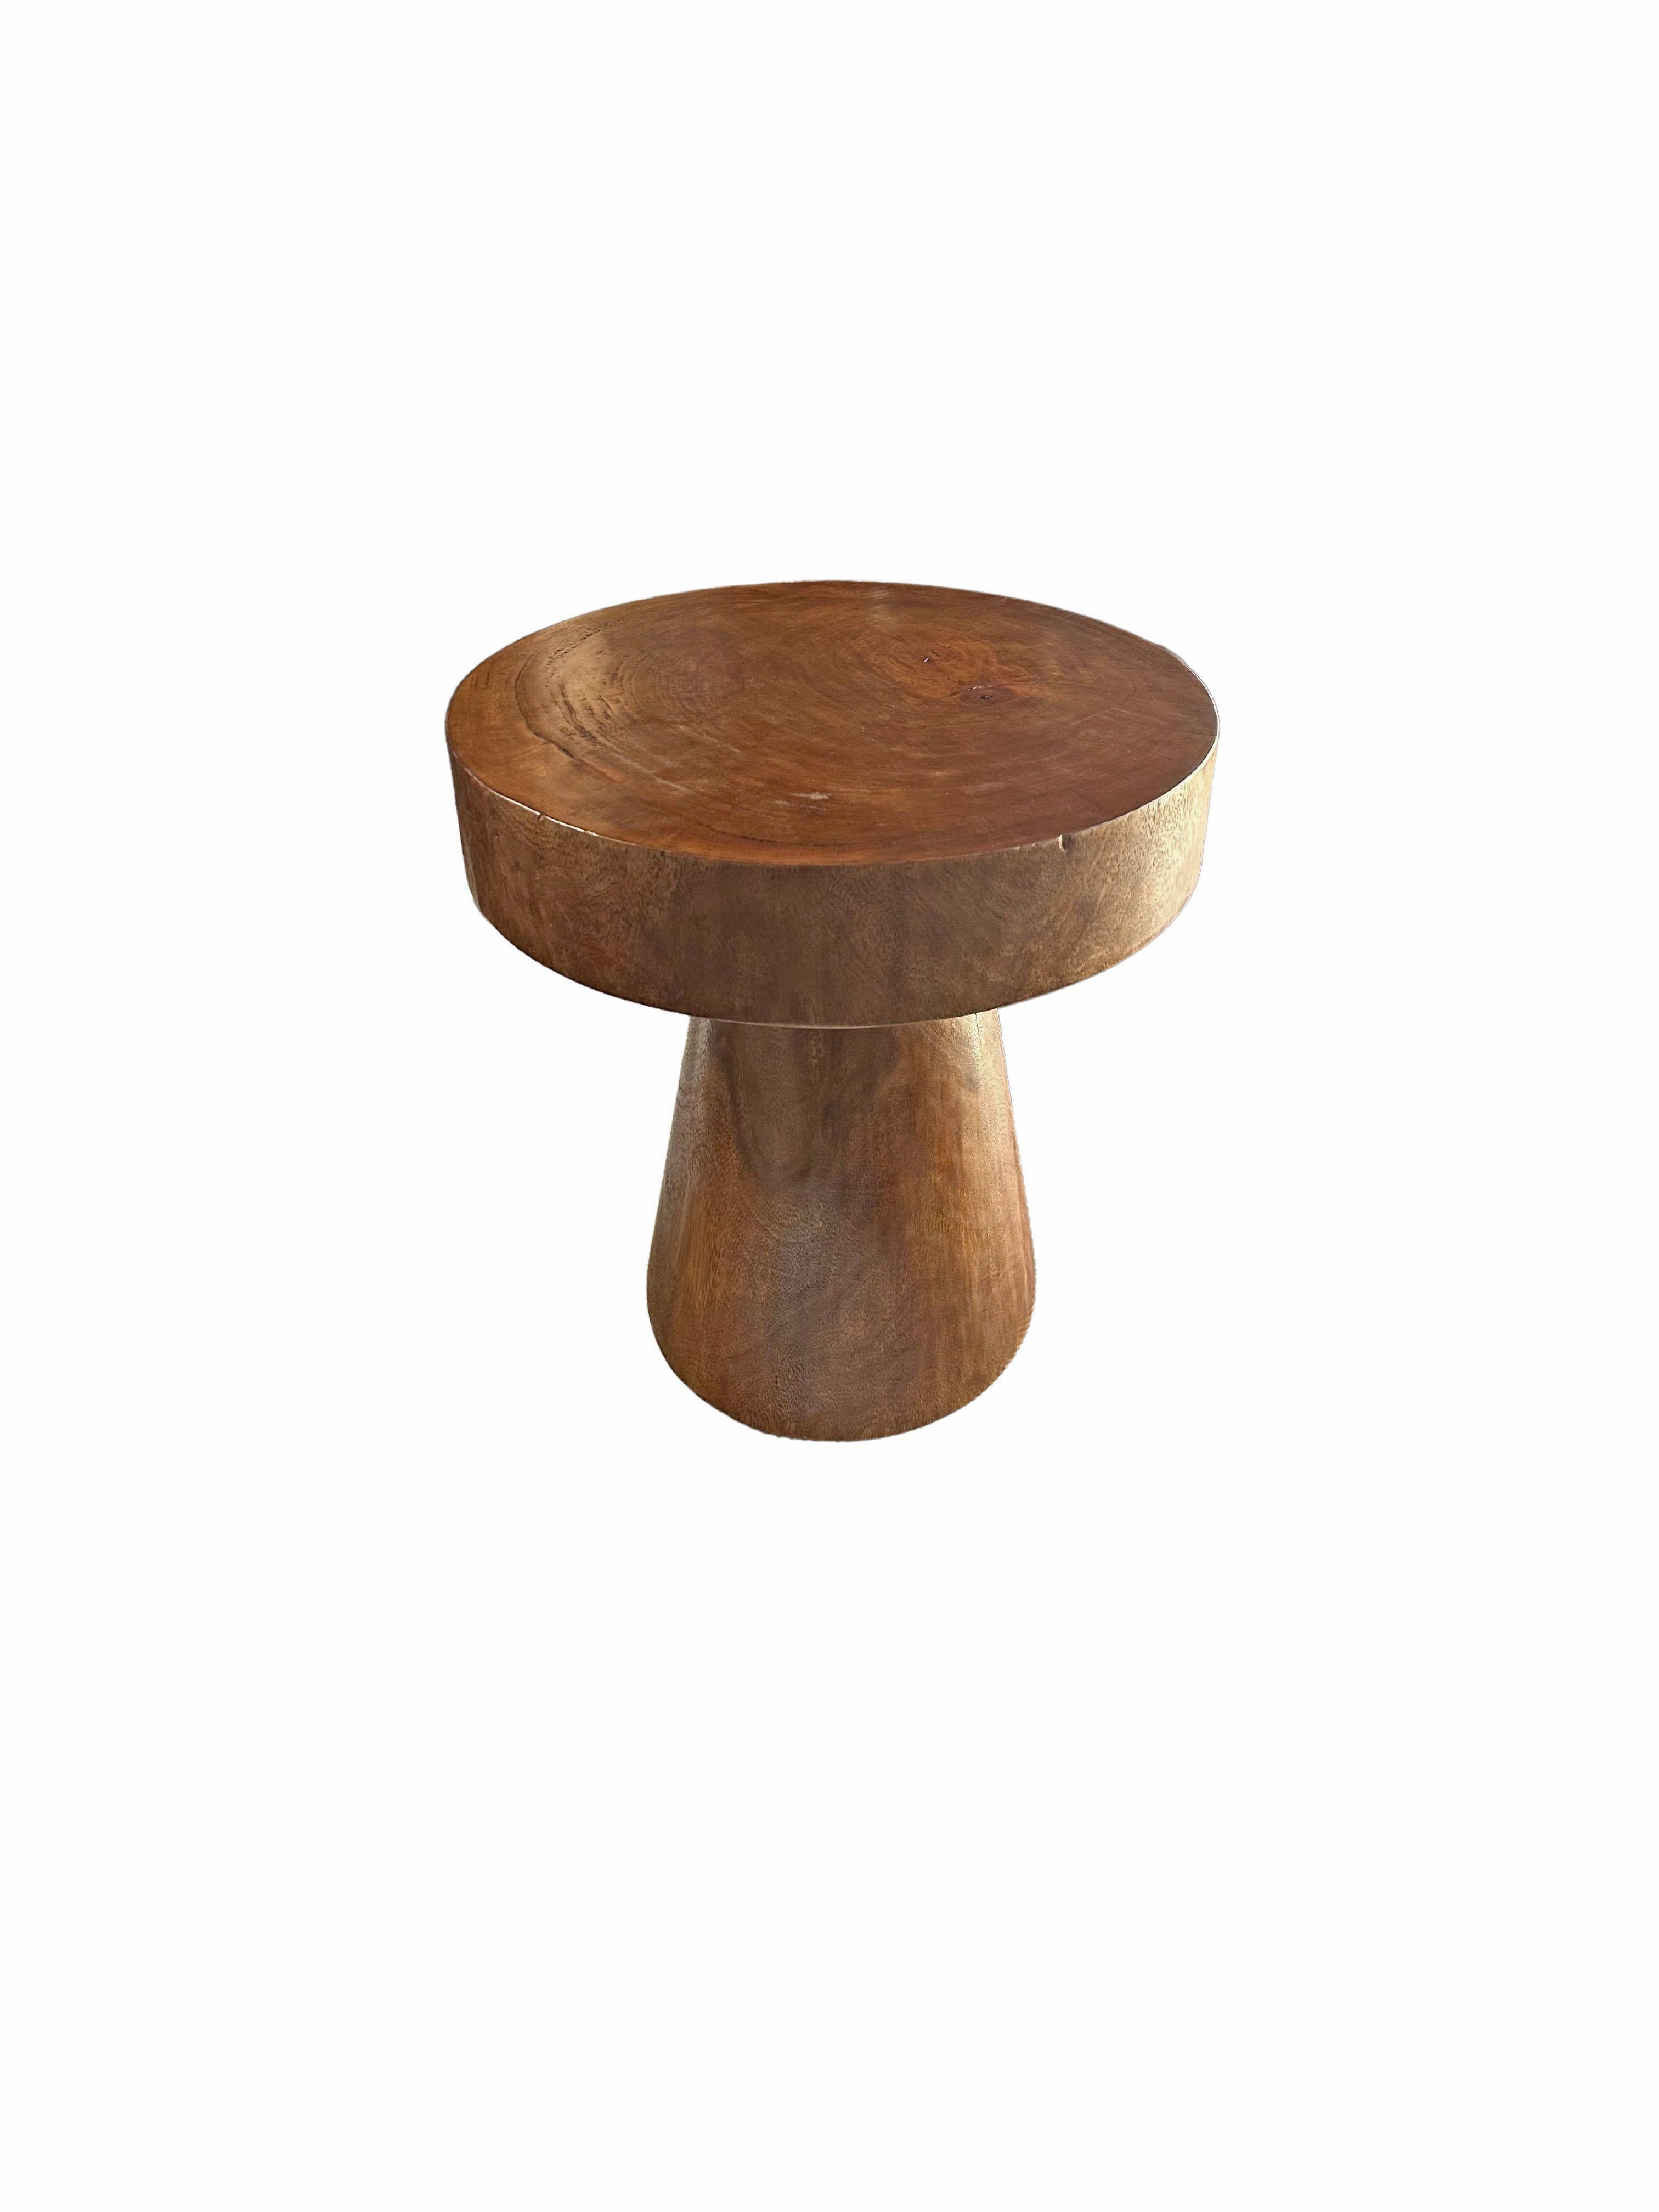 Organic Modern Sculptural Round Side Table Suar Wood  For Sale